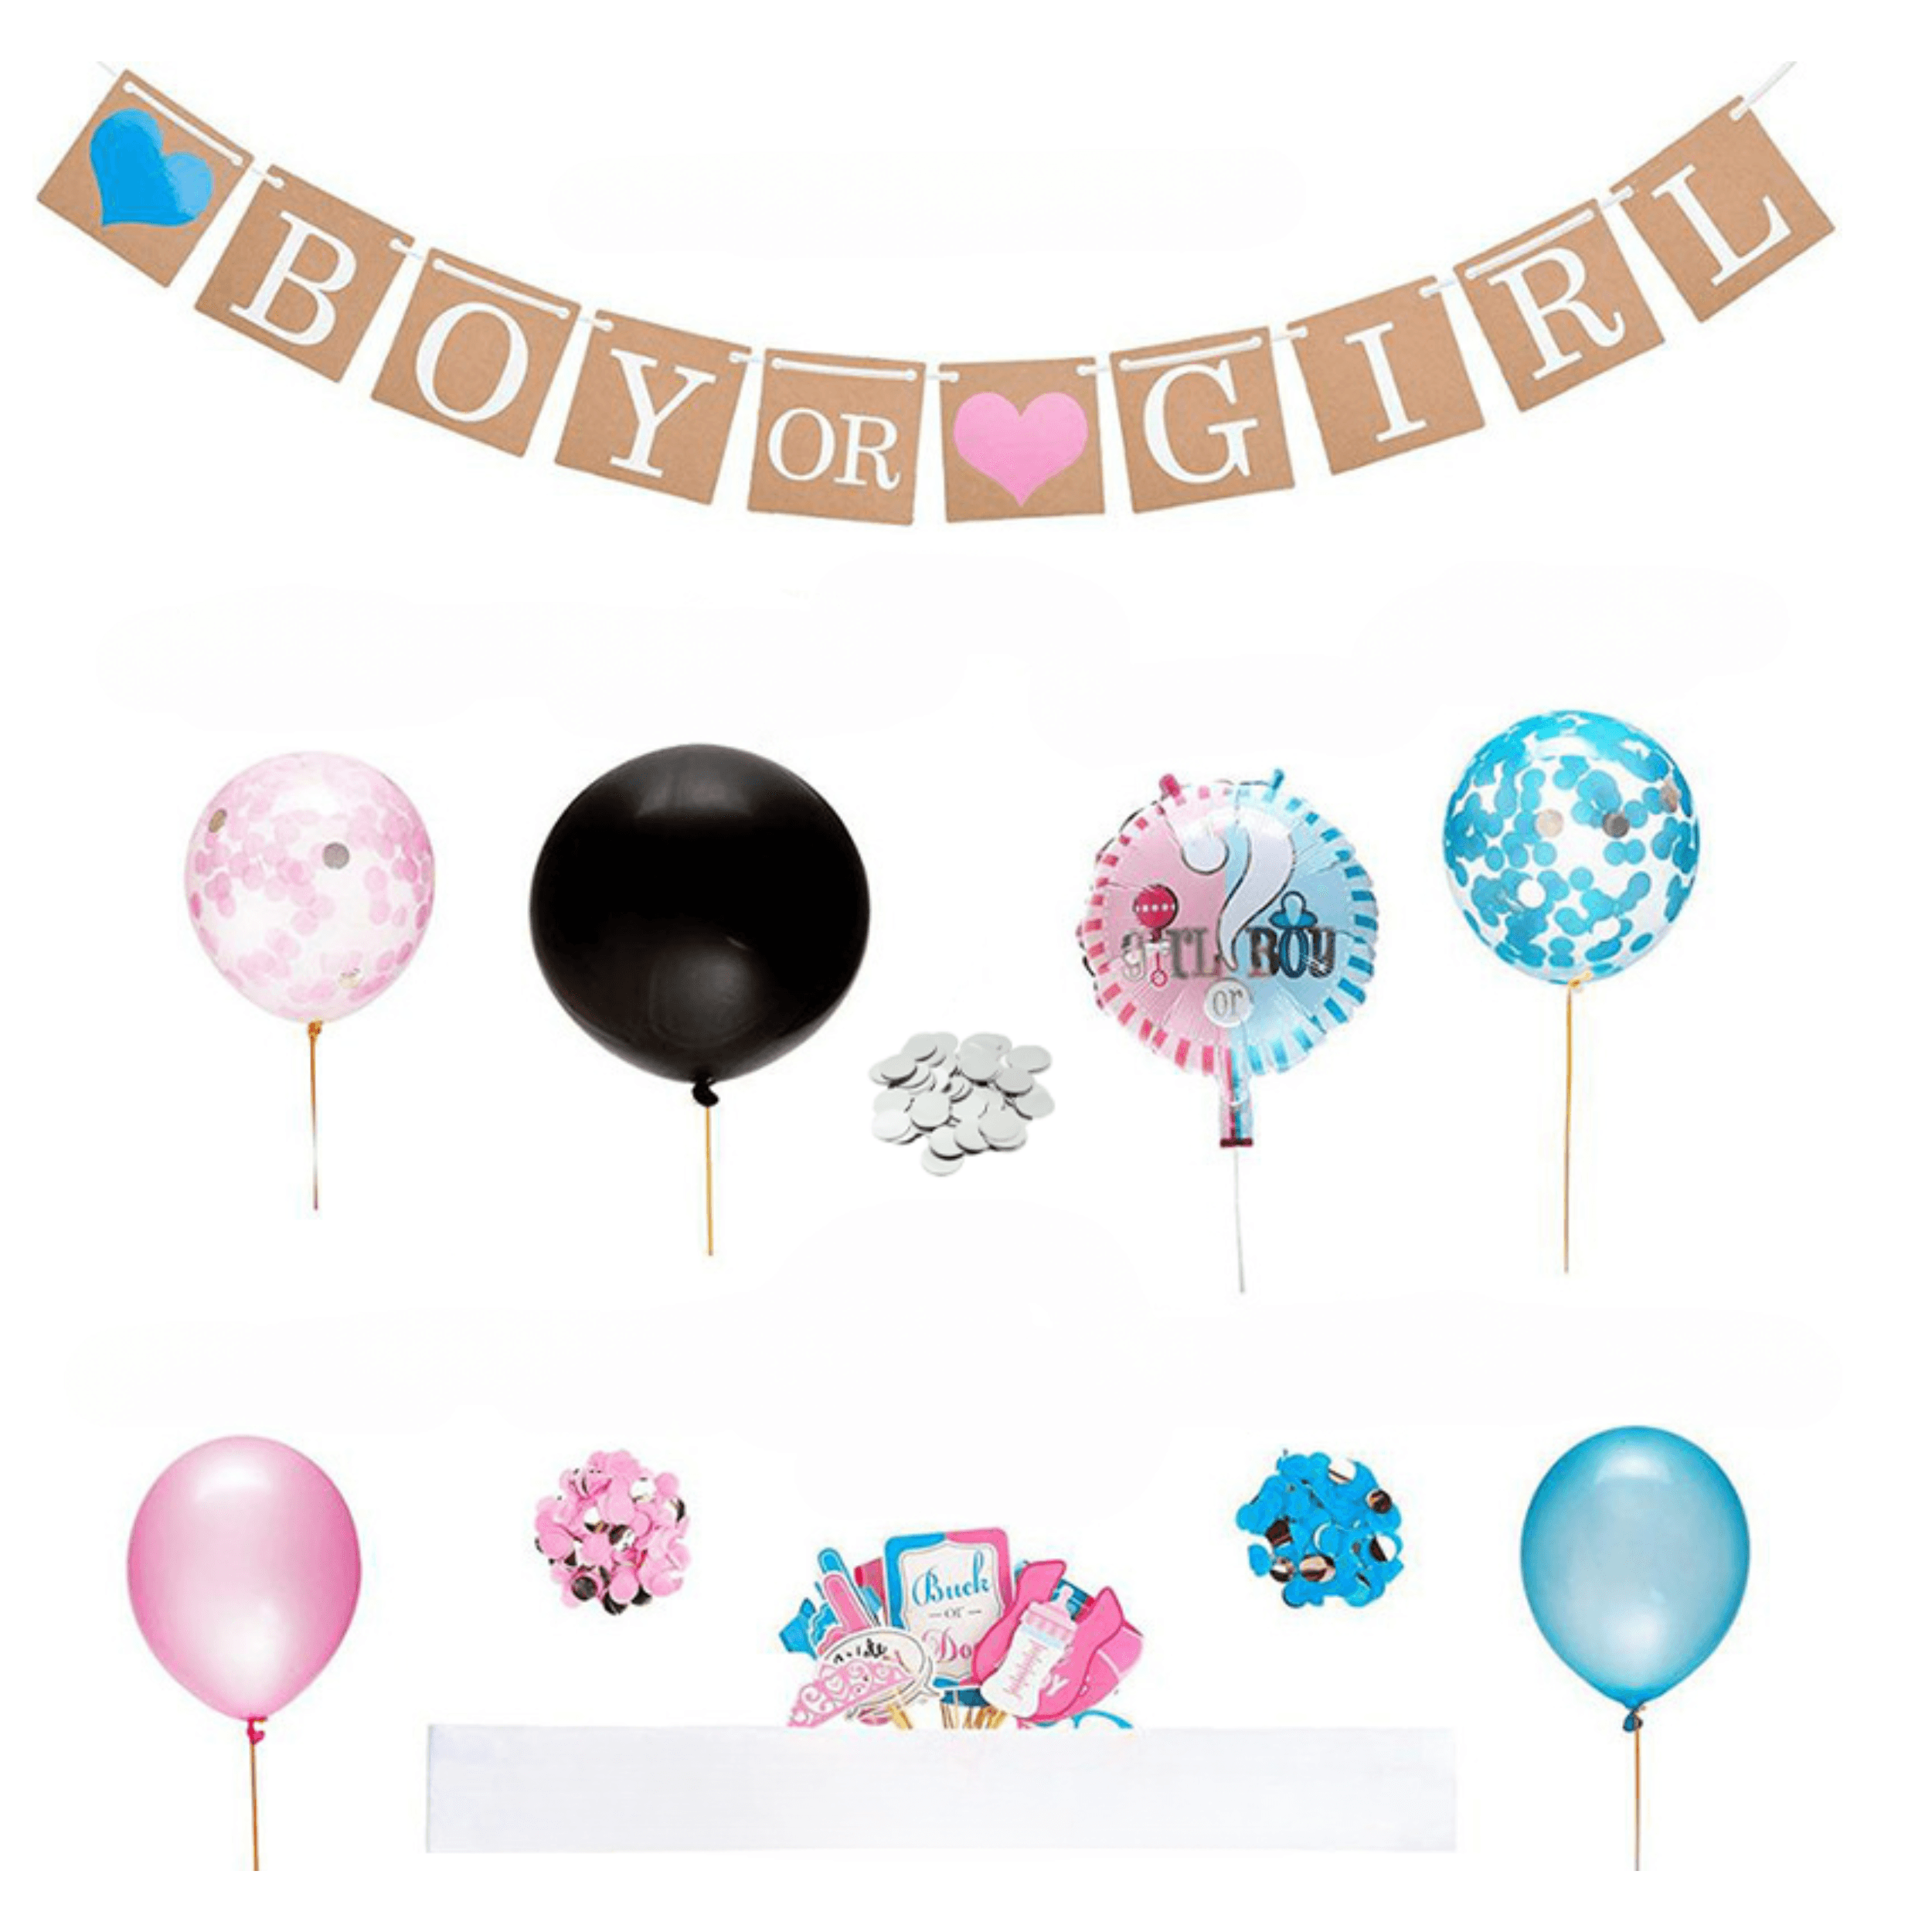 A set of balloons and props for Baby Shower